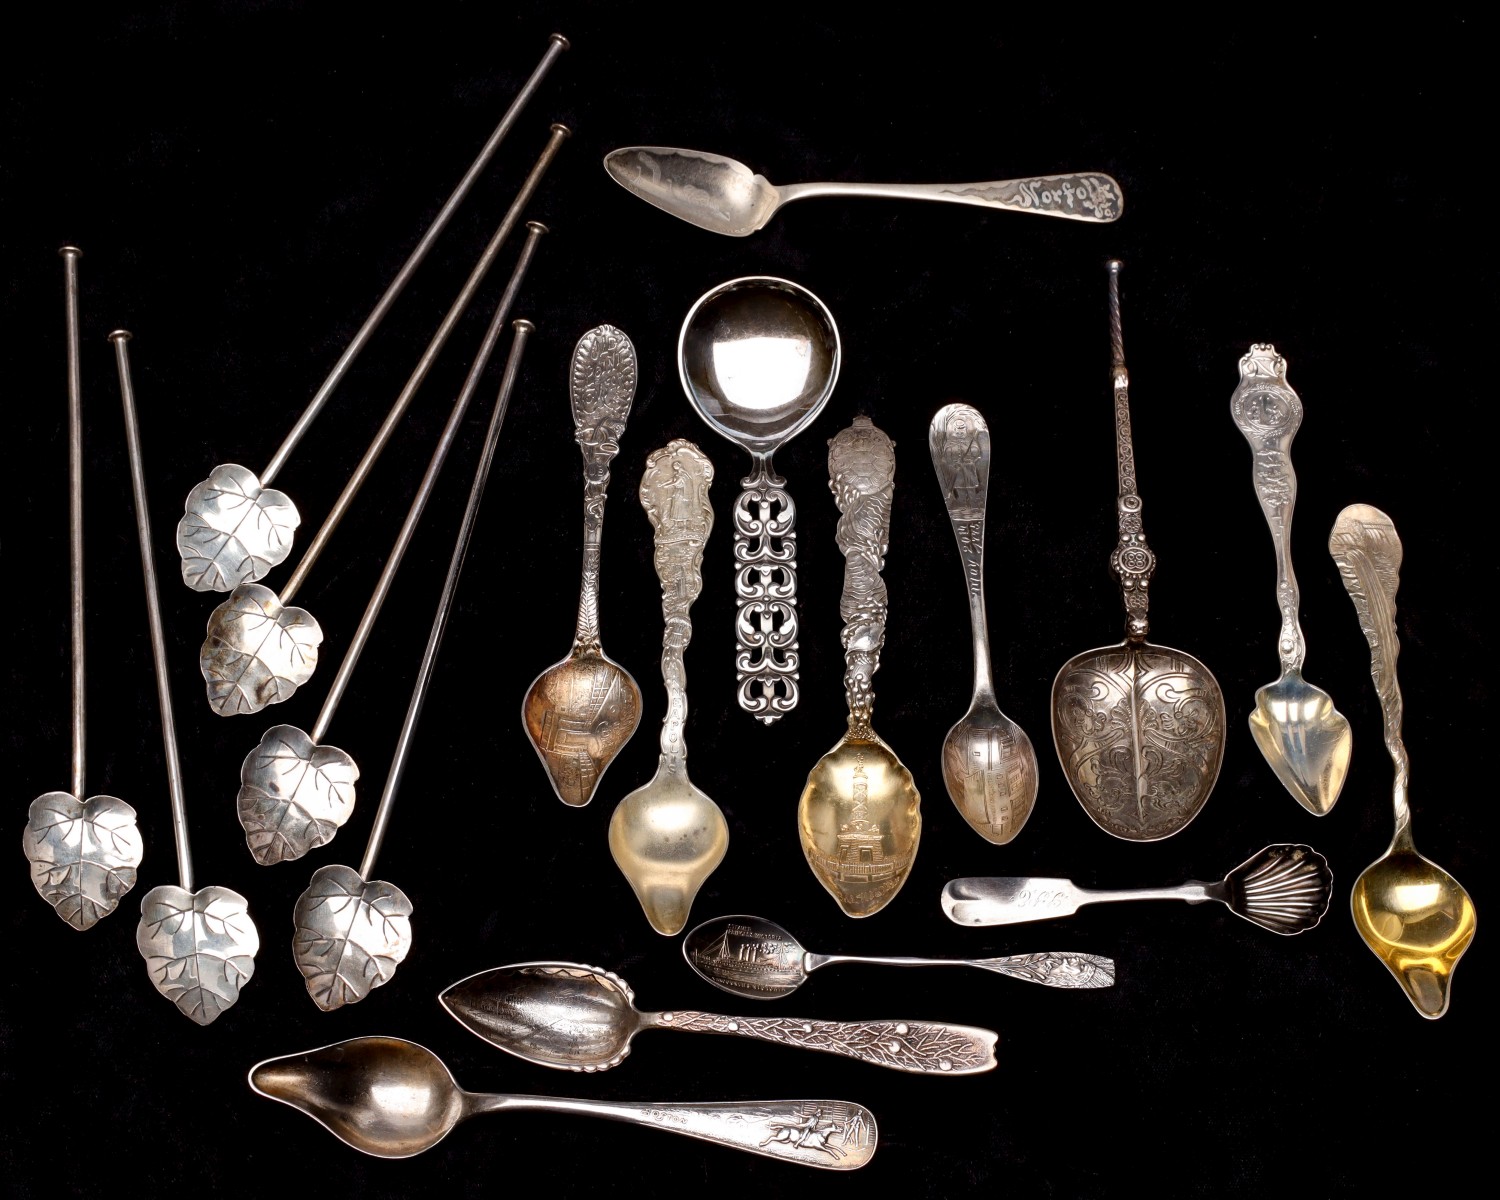 AN ESTATE COLLECTION OF STERLING SILVER SPOONS